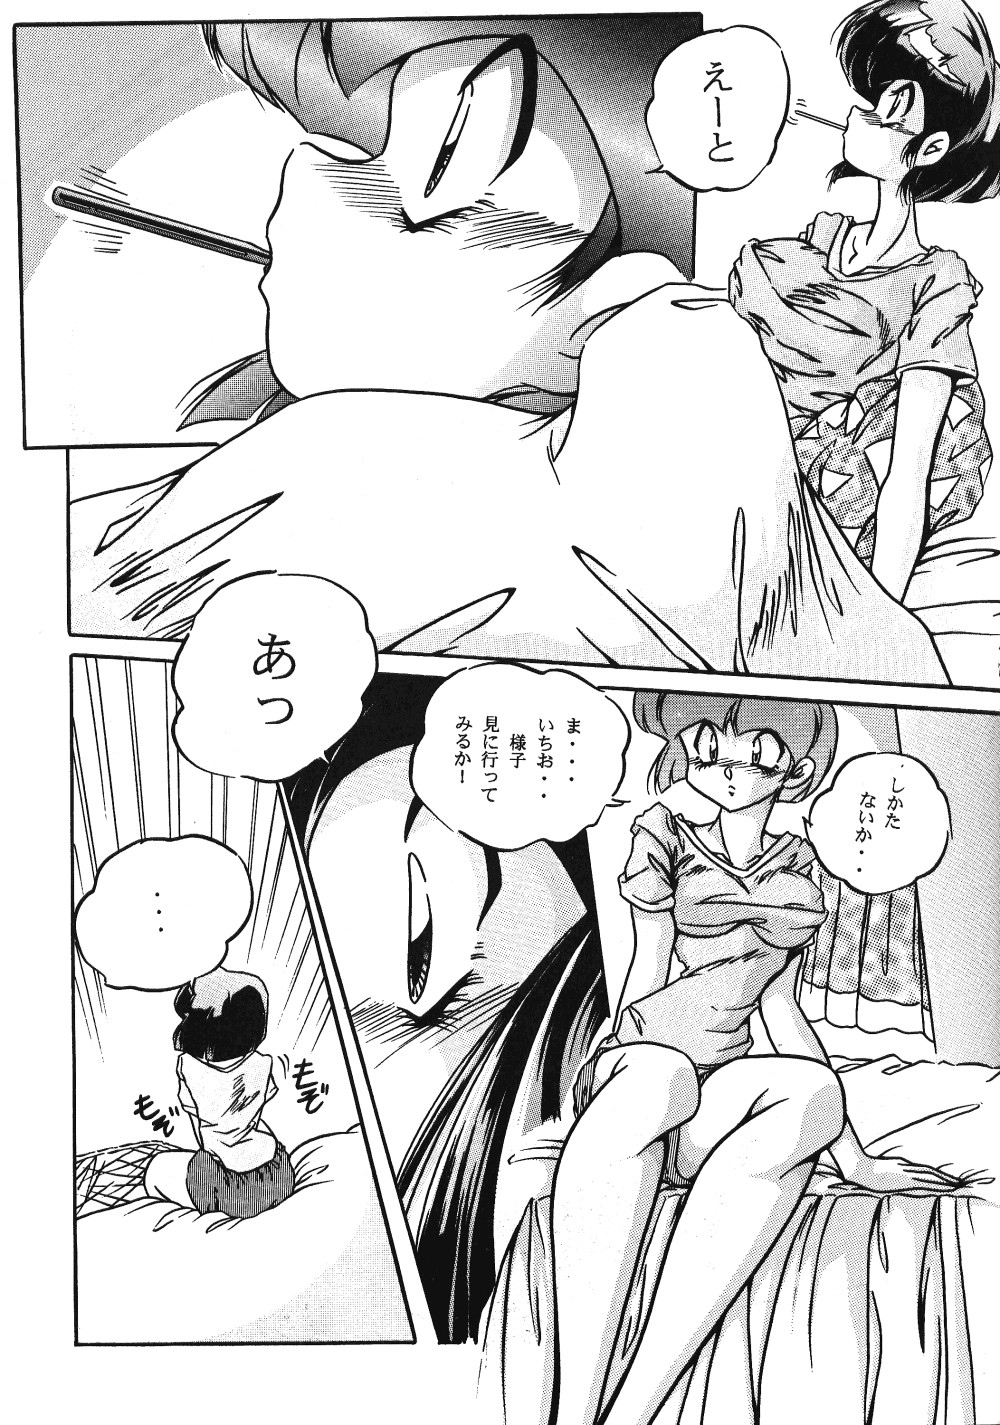 [C-COMPANY] C-COMPANY SPECIAL STAGE 18 (Ranma 1/2, Idol Project) page 18 full